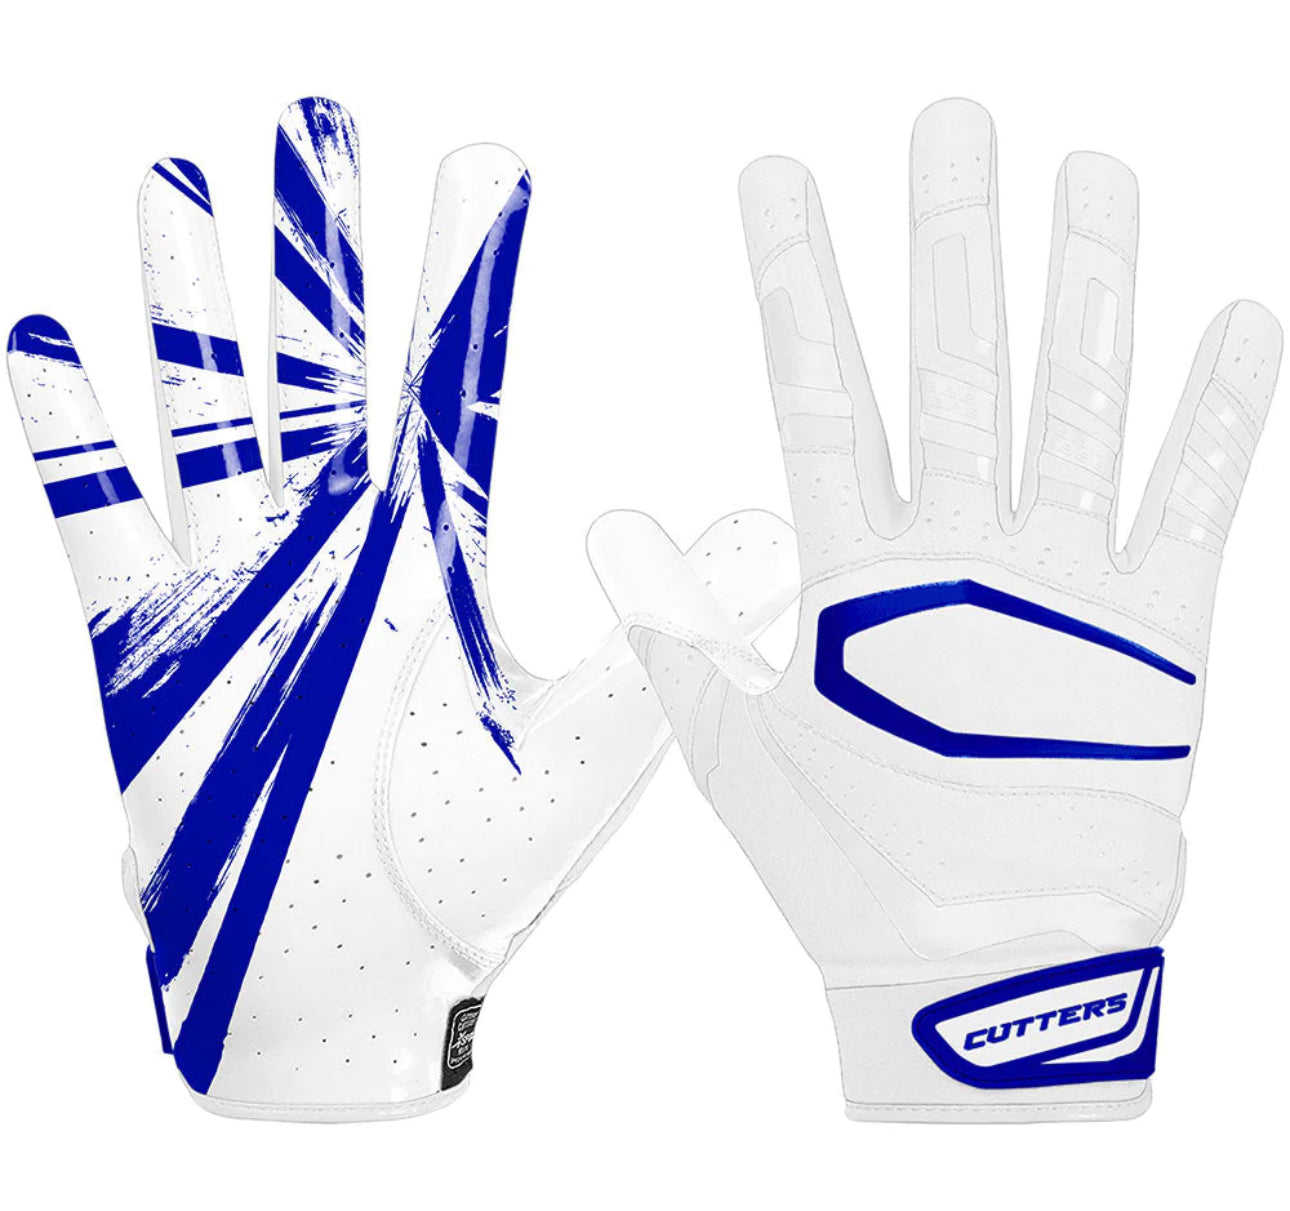 CUTTERS REV PRO 3.0 RECEIVER GLOVES ROYAL BLUE